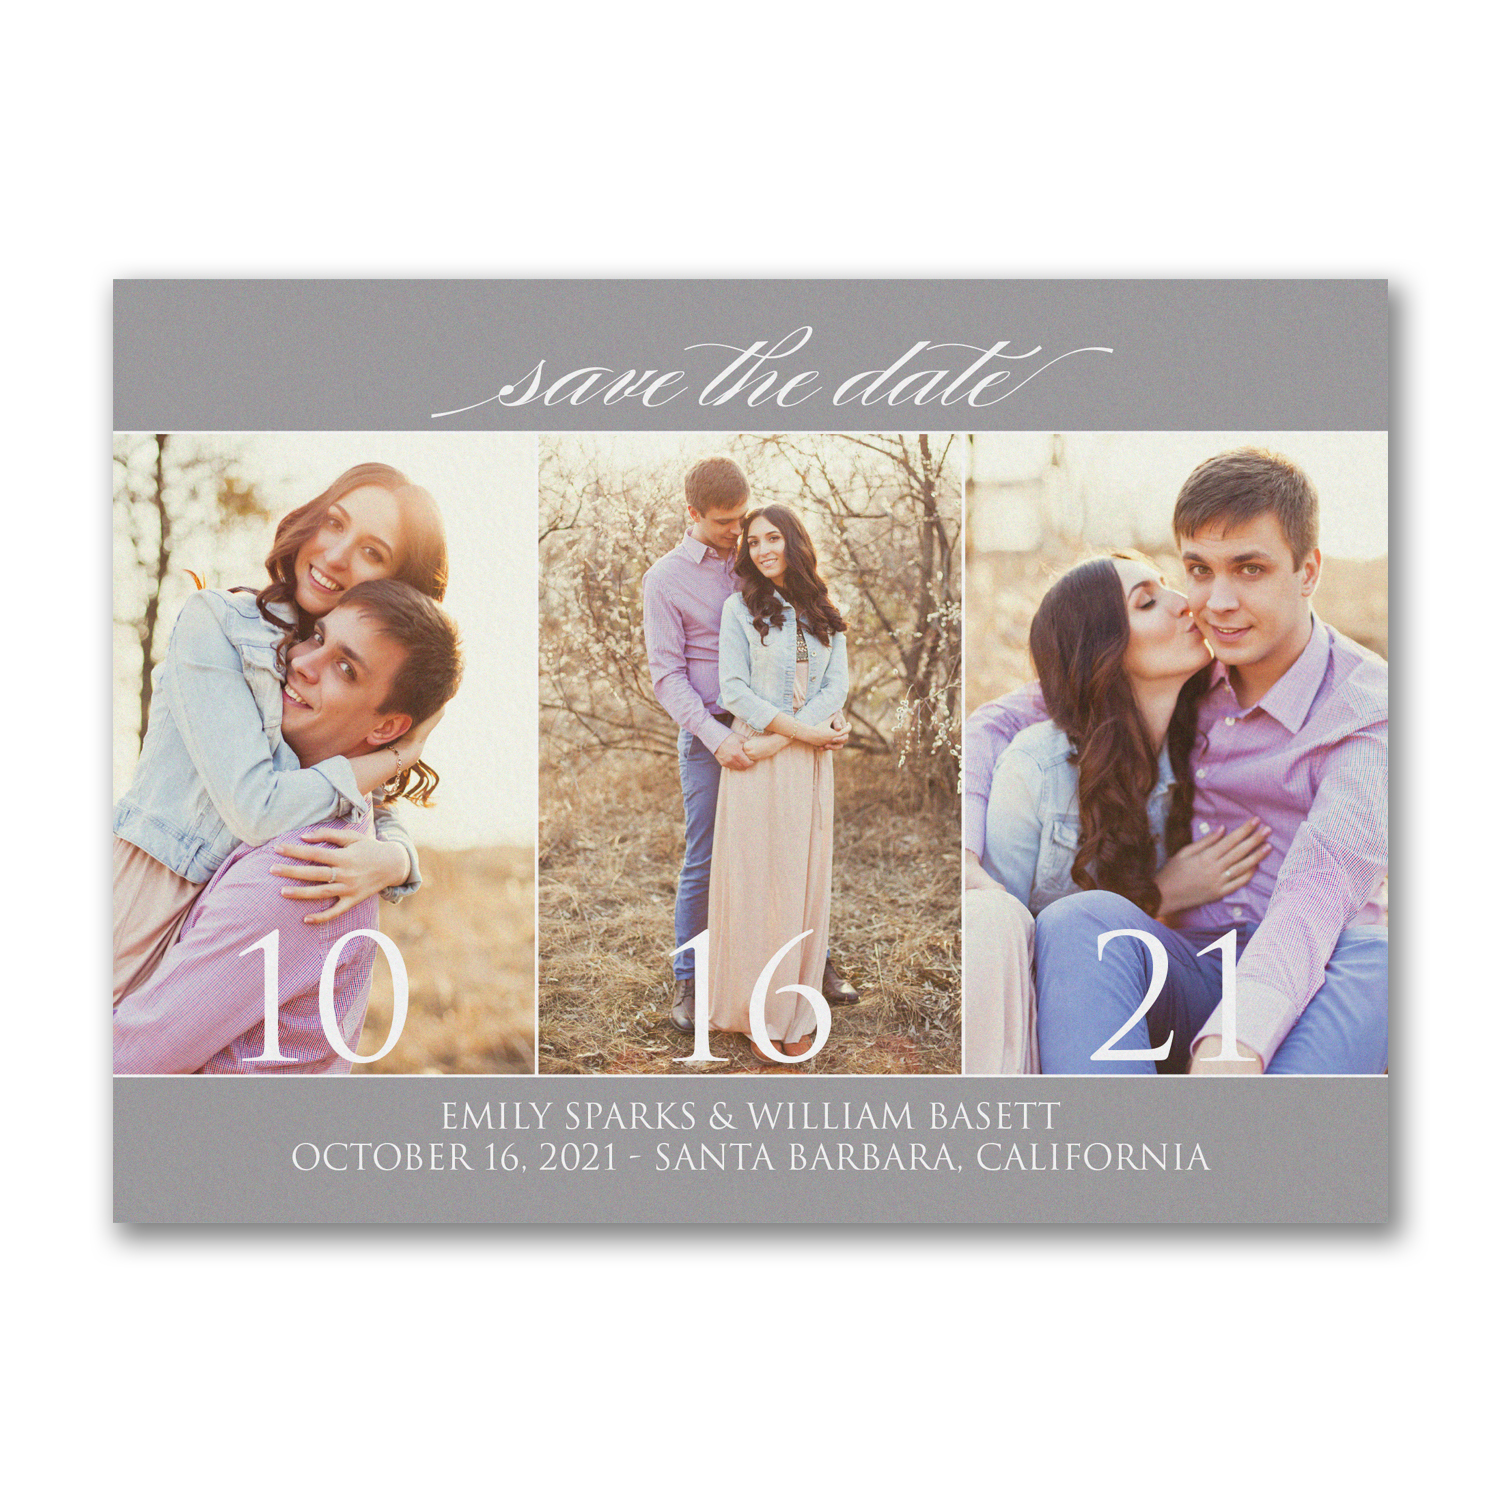 special date photo save the date carlson craft